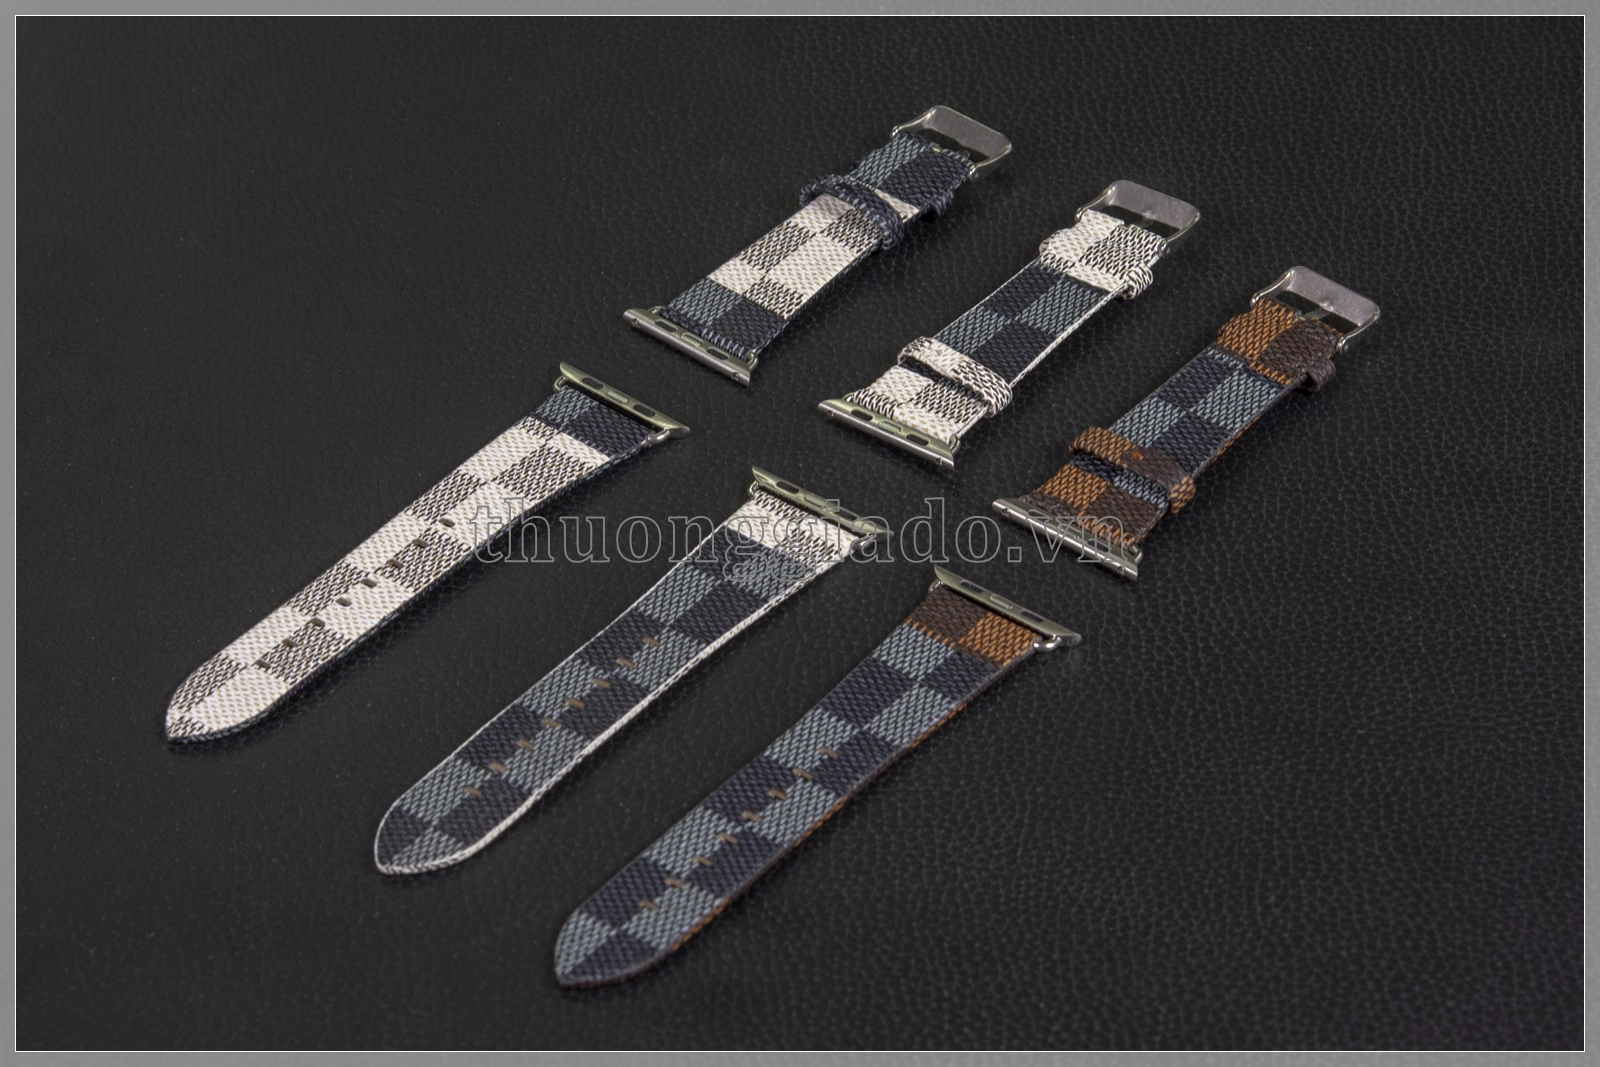 Handmade Louis Vuitton Apple Watch Band The total band length is 146mm to  190mm 5 34 to 7 12 plus the watc  Correa de reloj Apple watch  correas Reloj apple